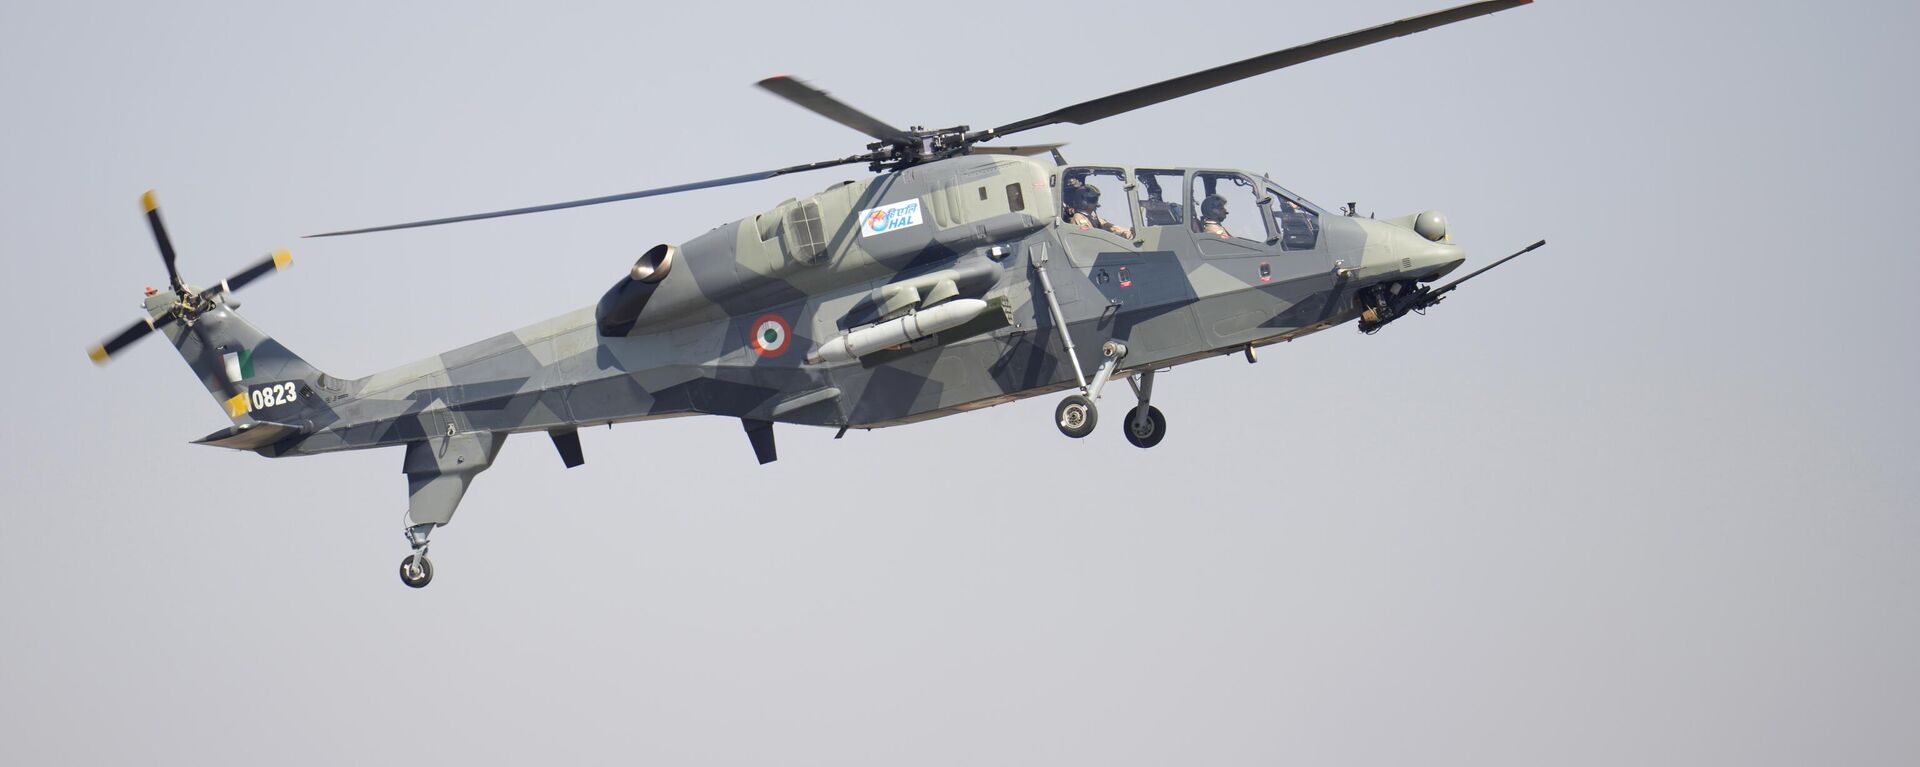 India's indigenous light combat helicopter Prachand flies over a bird during the inauguration of the Aero India 2023 at Yelahanka air base in Bengaluru, India, Monday, Feb. 13, 2023. - Sputnik India, 1920, 02.11.2023